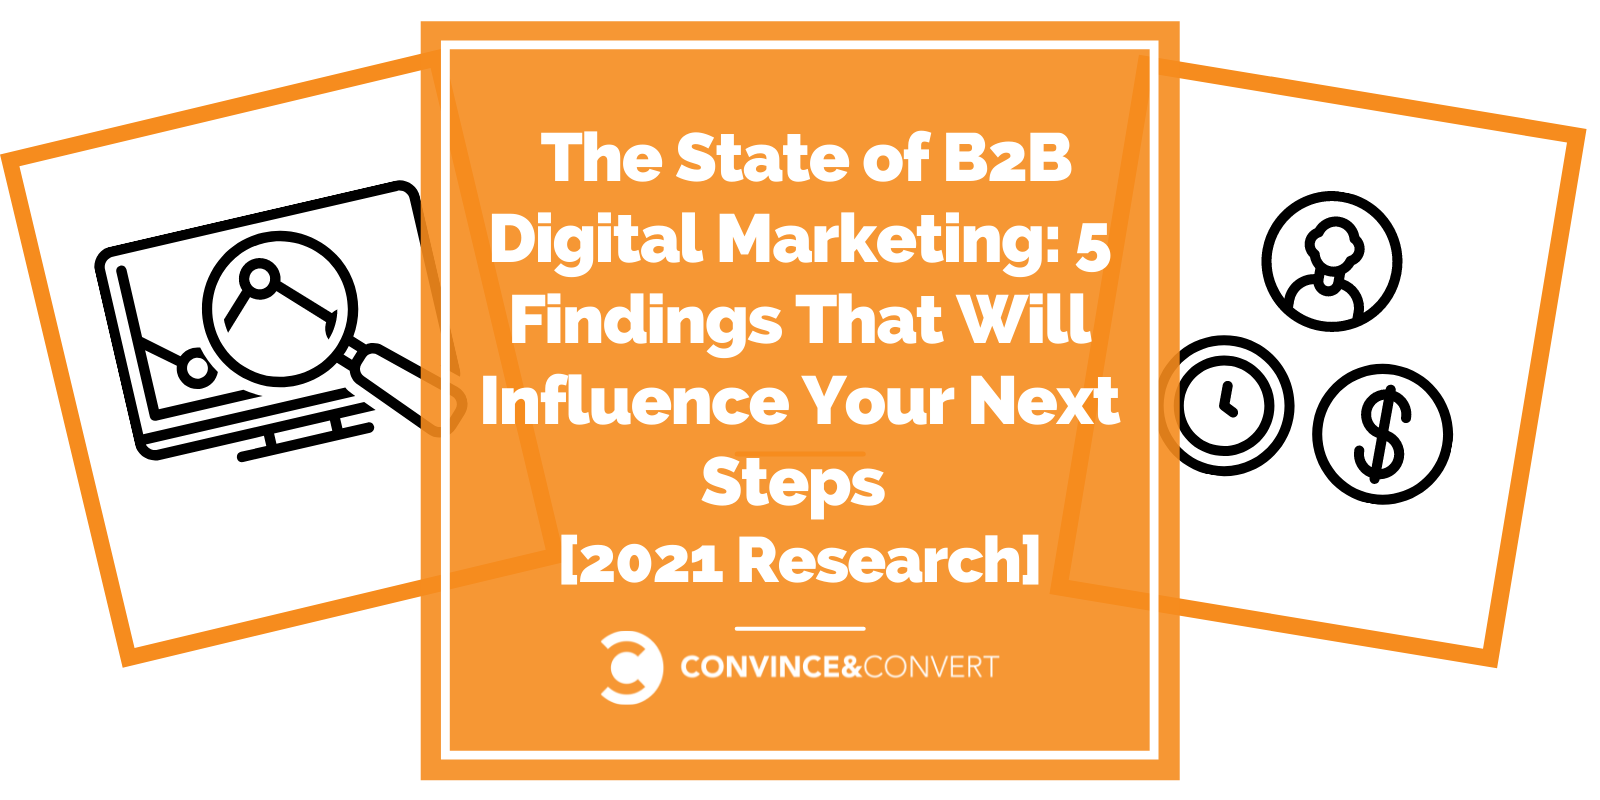 The State of B2B Digital Marketing: 5 Findings That Will Influence Your Next Steps